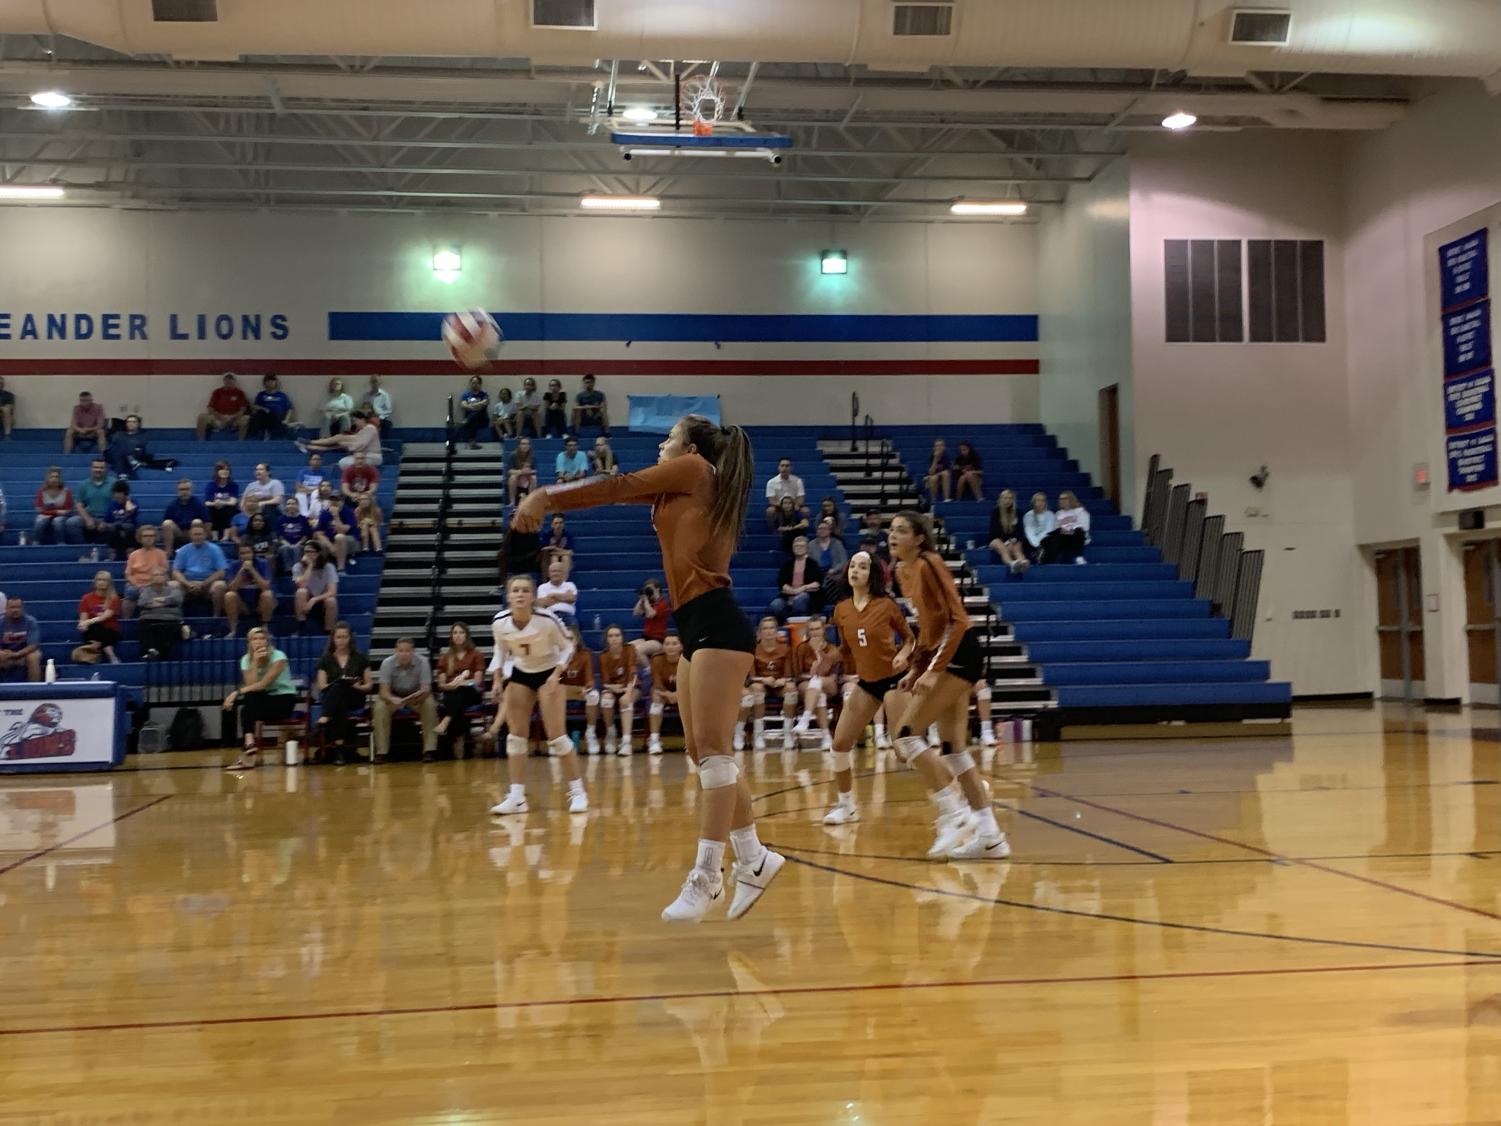 Varsity+Volleyball+Overcomes+Leander+in+Five-Set+Thriller